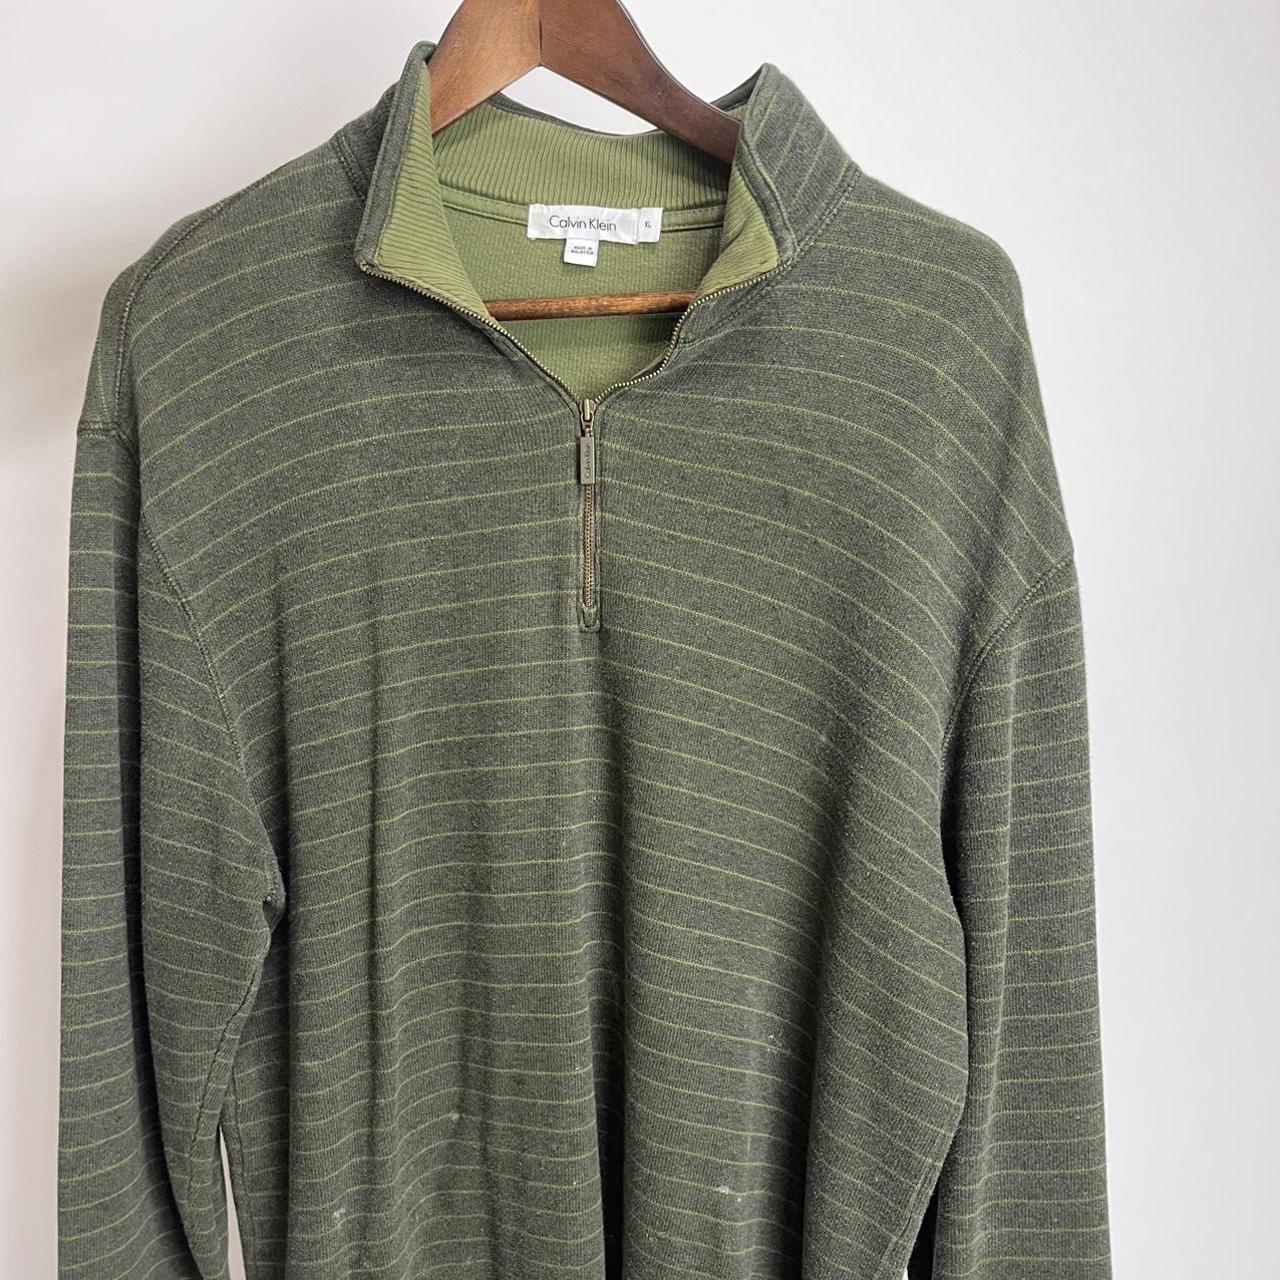 Product Image 2 - Long Sleeve Pullover 
Brand Calvin